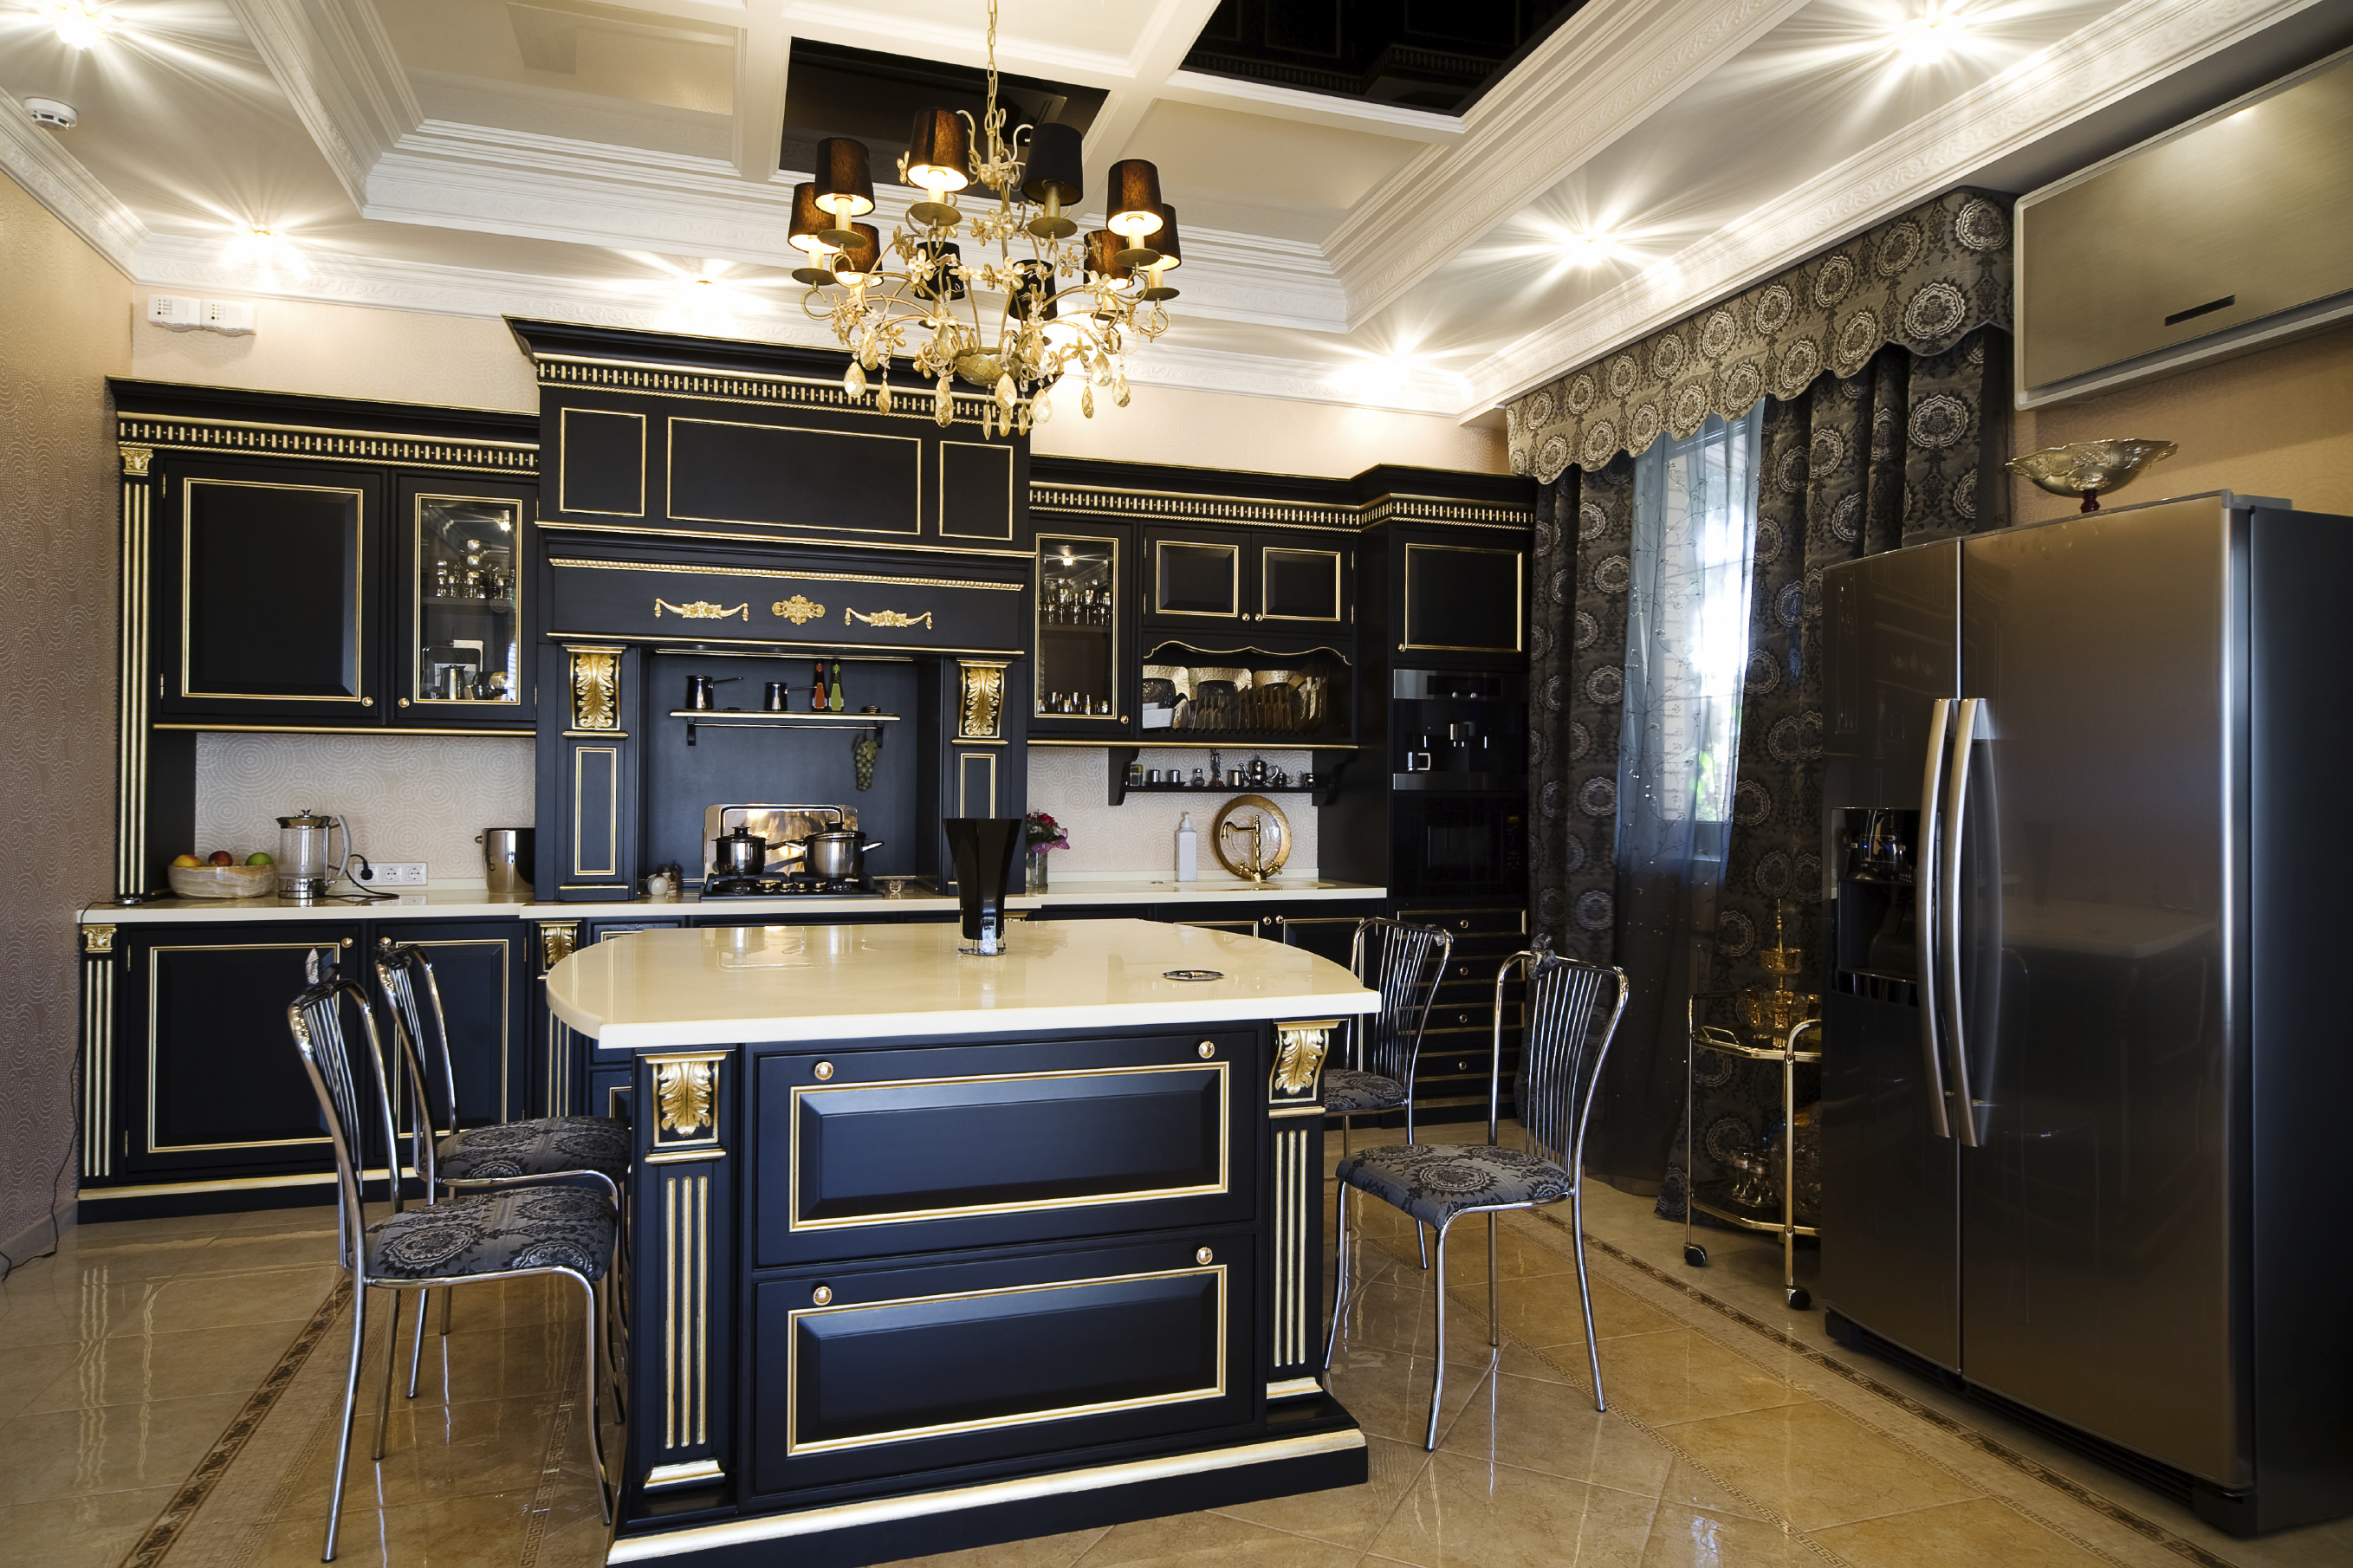 Will Black Kitchen Cabinets Soon Replace White Cabinets?